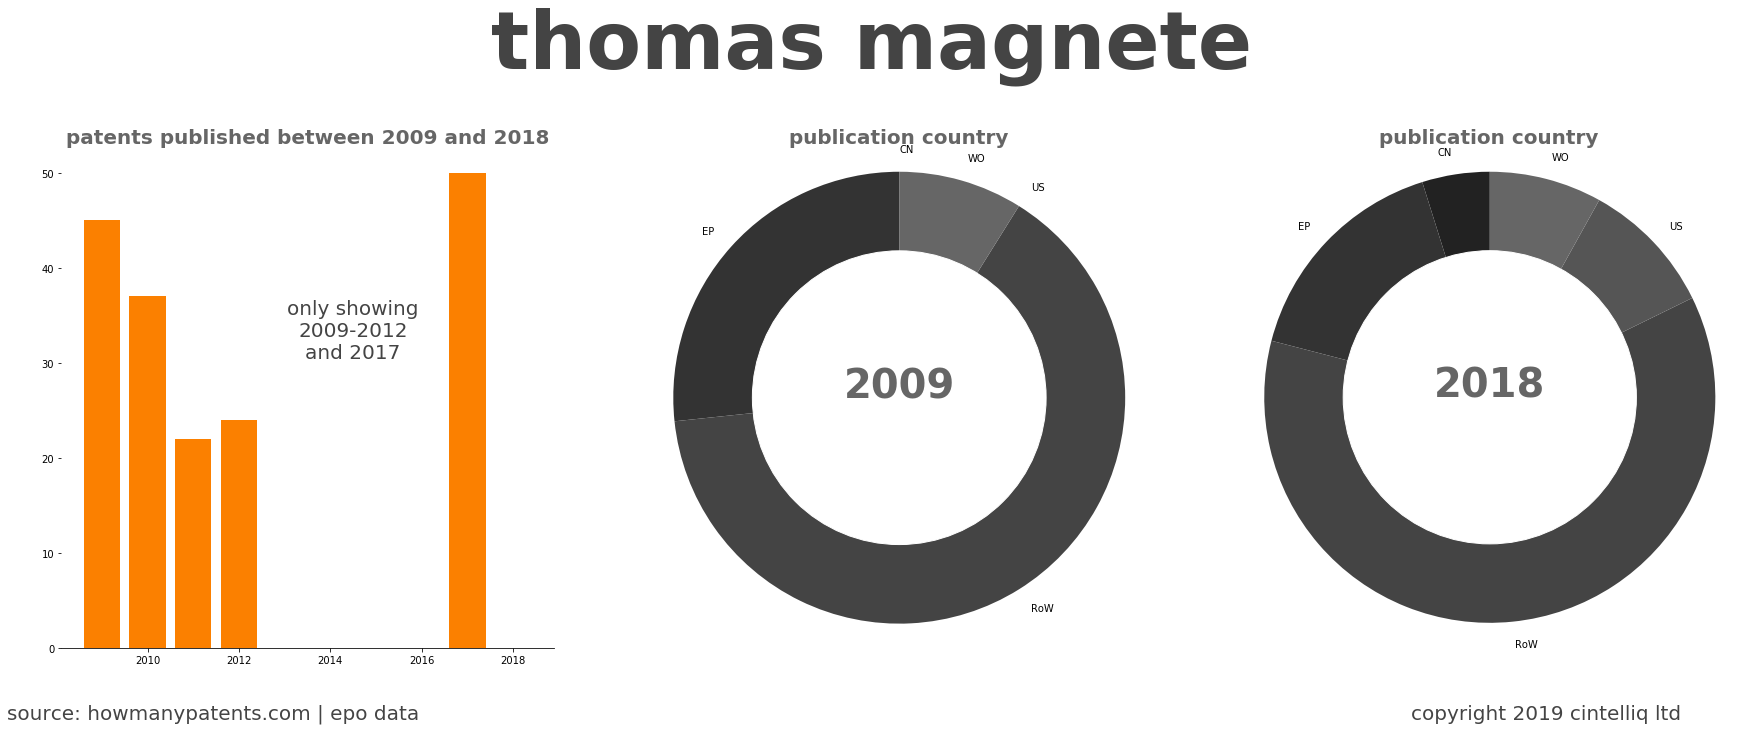 summary of patents for Thomas Magnete